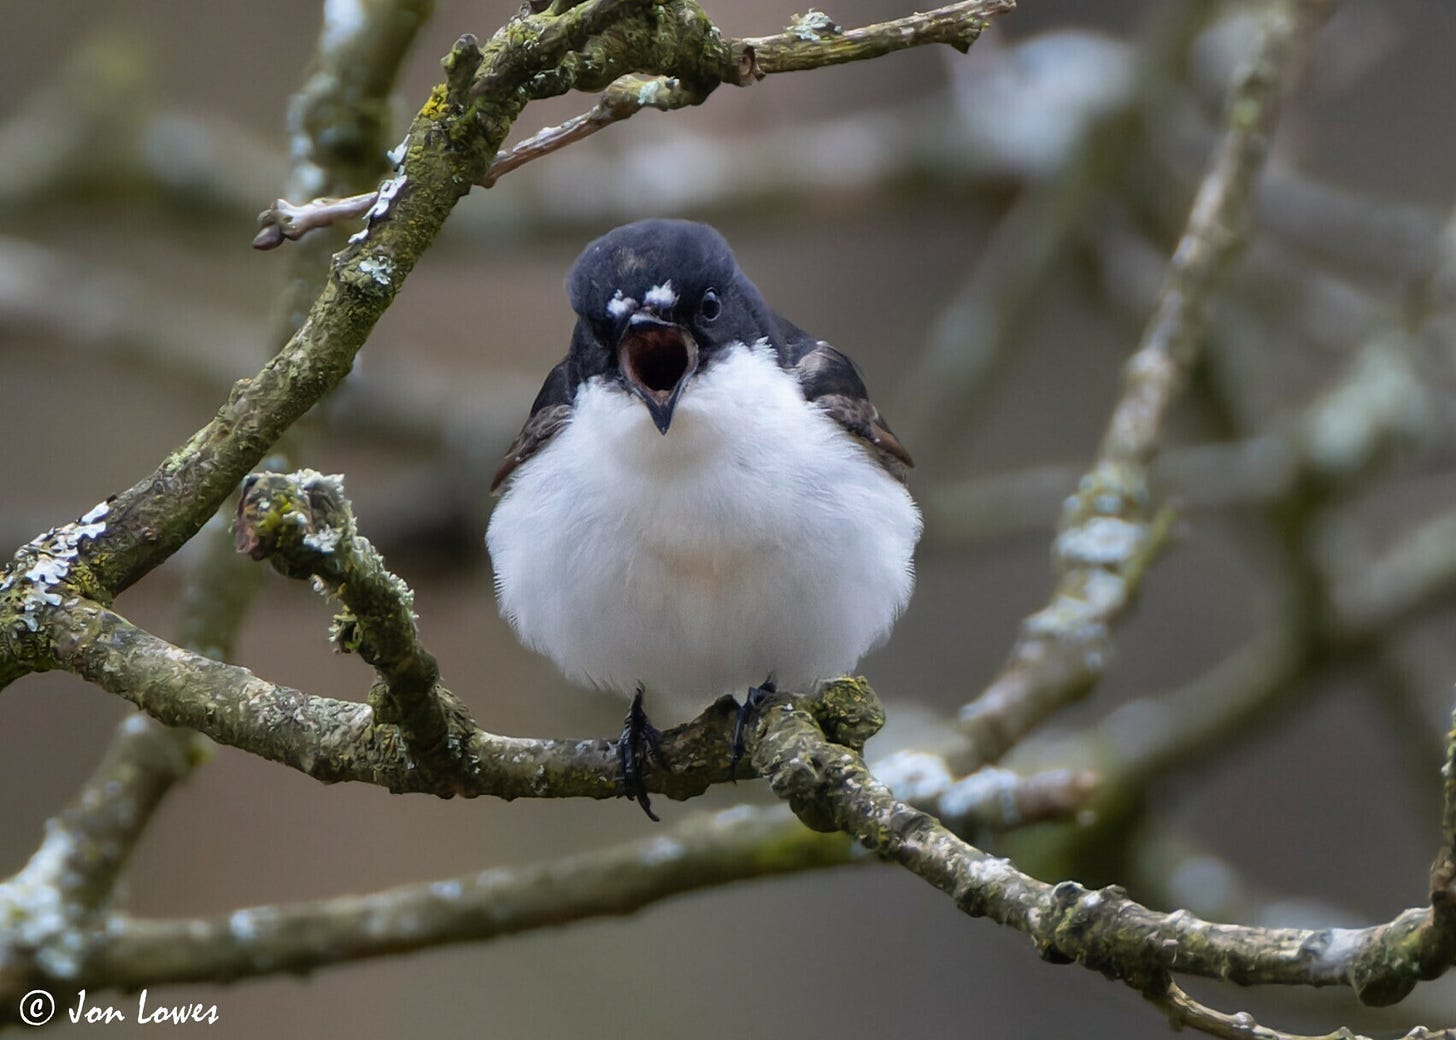 A sub-saharan migrant, Pied Flycatchers return to the UK each spring to breed in shady, mixed and deciduous woodland, especially where there are oak trees.